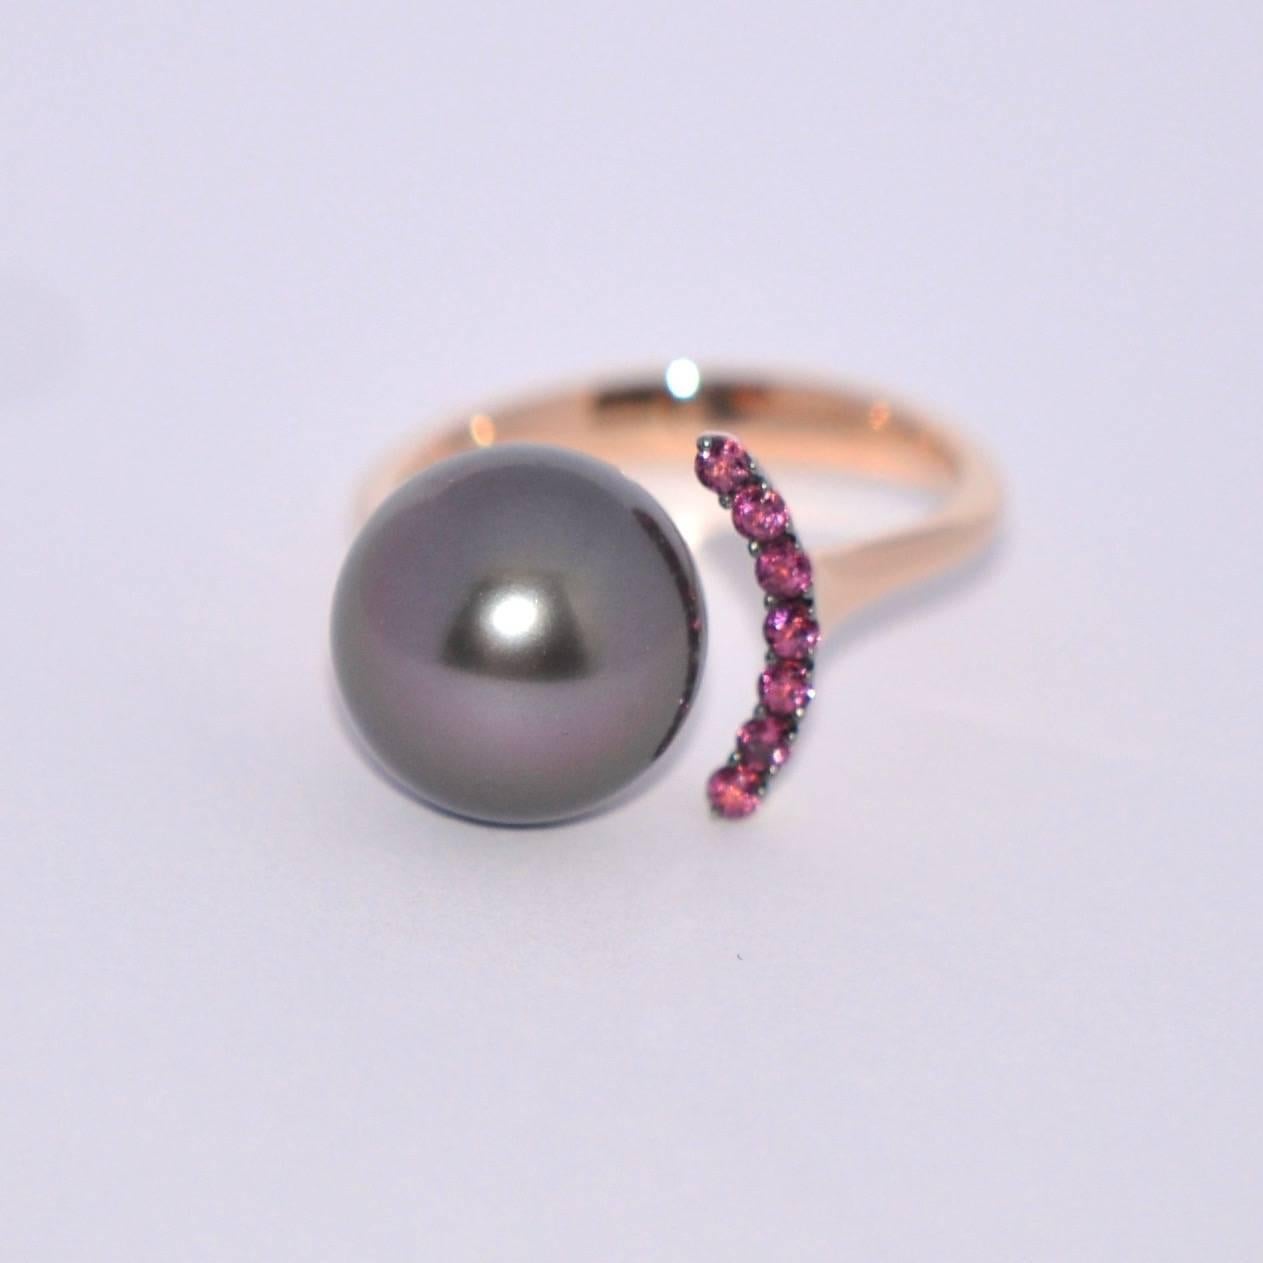 Discover this Black South Sea Pearl 11-12 mm Rhodolite ct 0,25 on Rose Gold 18K Ring.
South Sea pearls require no artificial treatments or colouring before being put onto the market. By virtue of such prestige and beauty they are considered “the